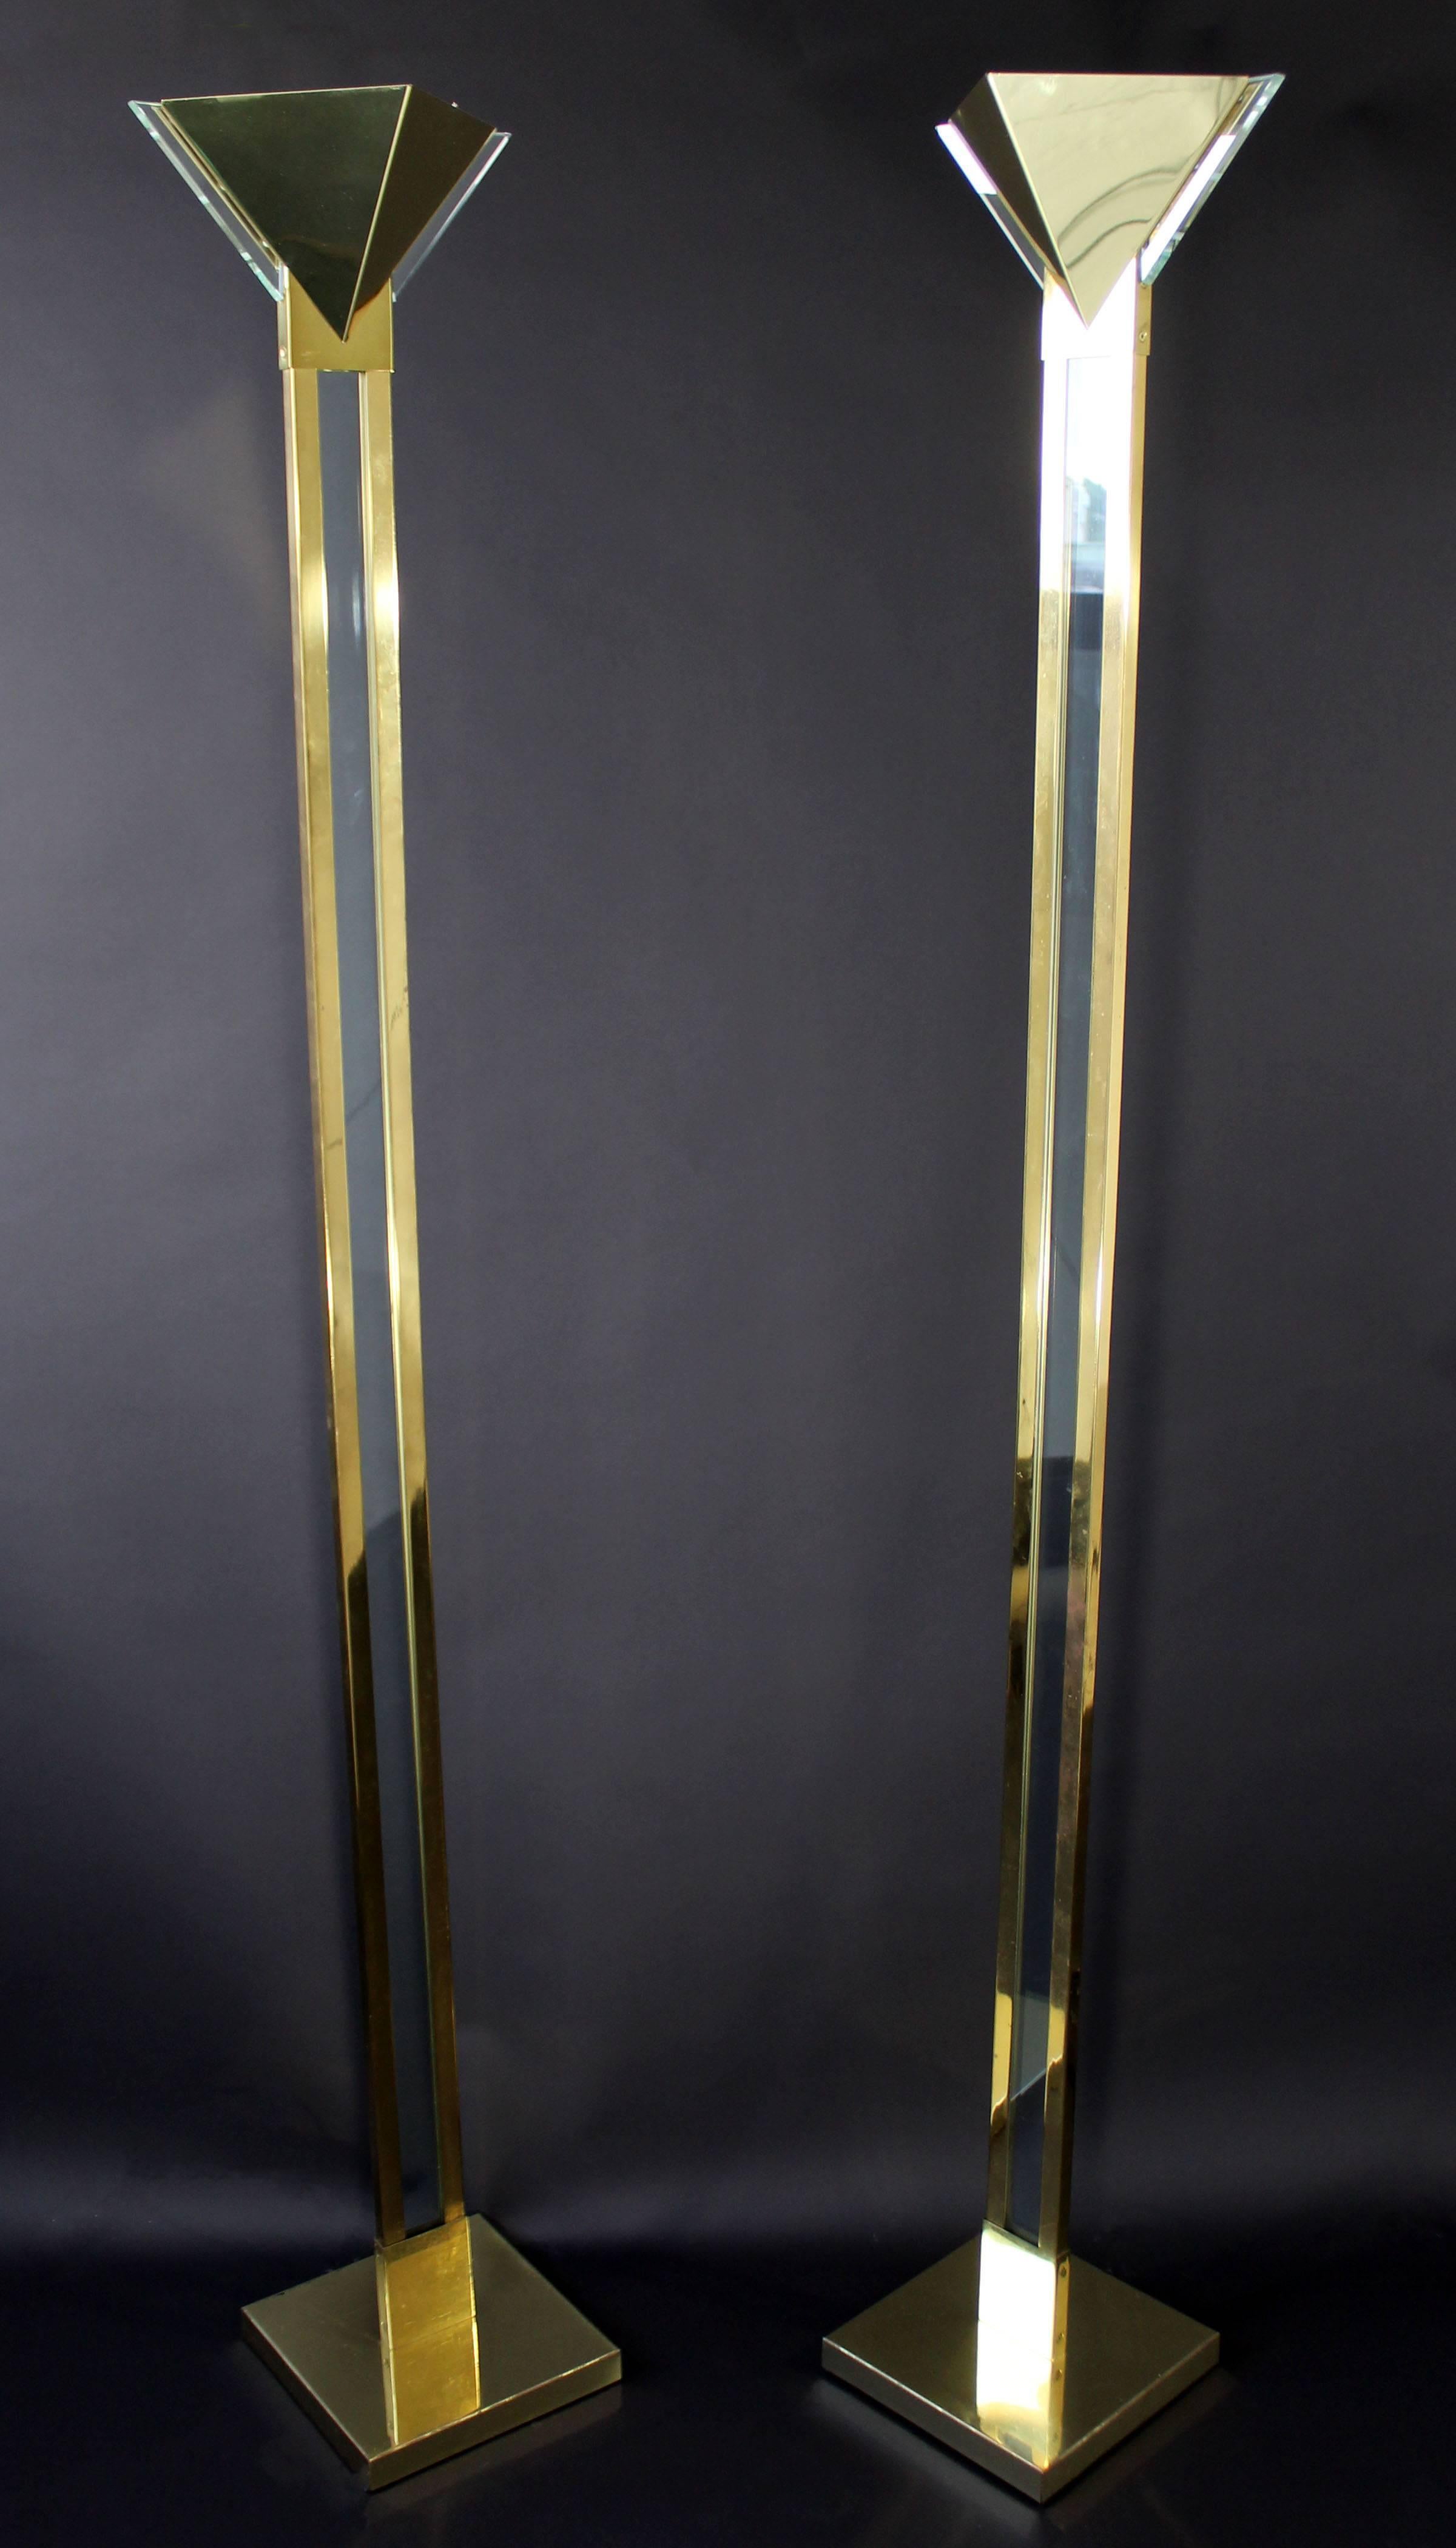 For your consideration is a luxe pair of brass and Lucite floor lamps, designed by Robert Sonneman for George Kovacs, circa 1970s. The Lucite is in mint condition on both lamps, whereas the brass has some wear. The dimensions are 9.5